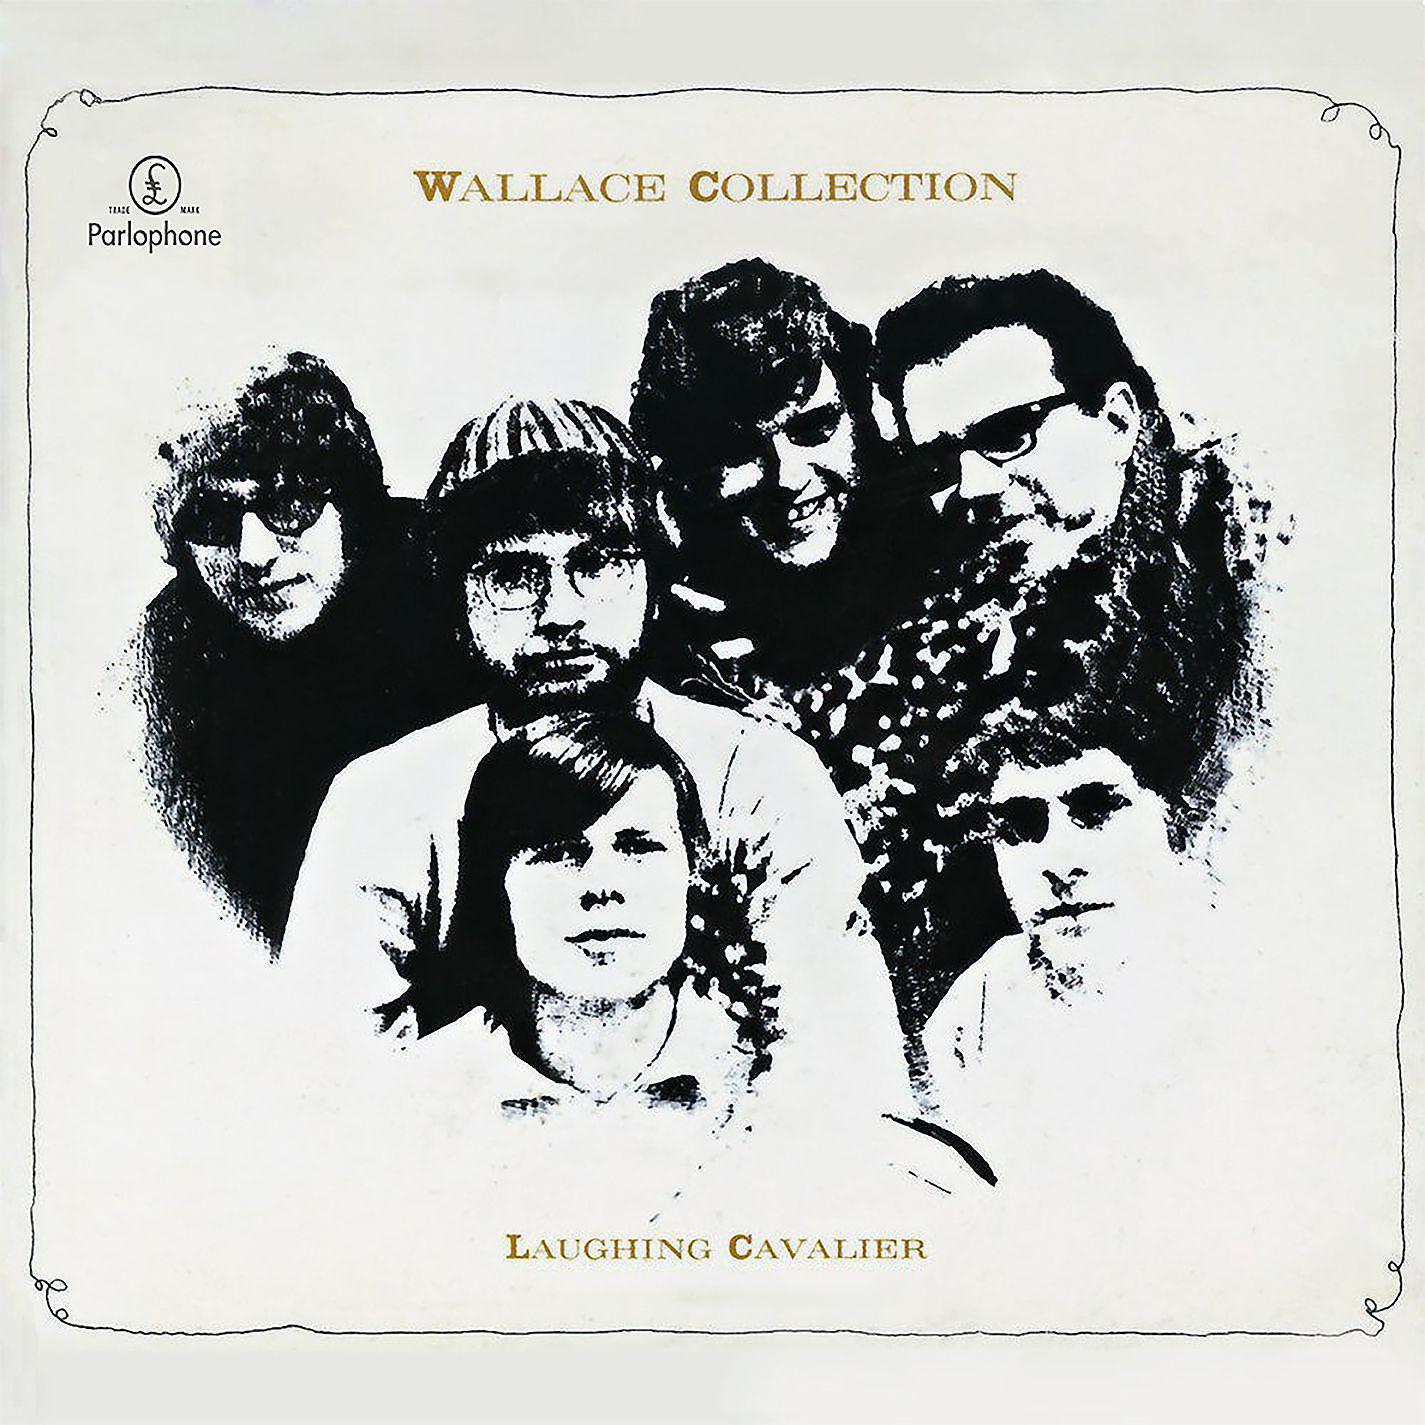 Wallace collection. Wallace collection 1969 - laughing Cavalier. Wallace Band обложки. Wallace collection распечатка. Обложка для mp3 Wallace_collection-Daydream.